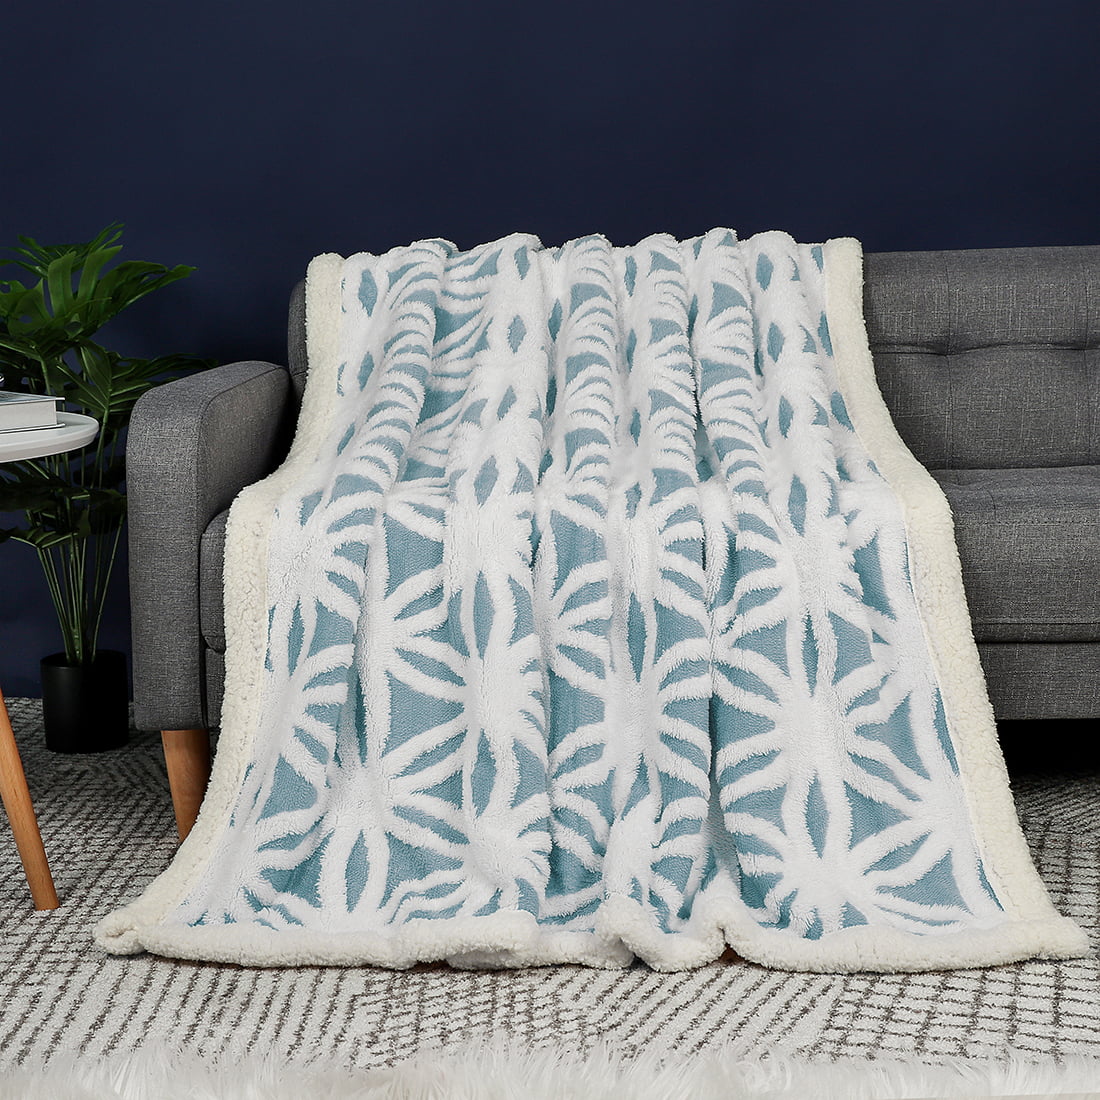 Snowflake Design Lux Fleece Blanket Soft Sherpa Lined Warm Home Sofa Bed Throw 